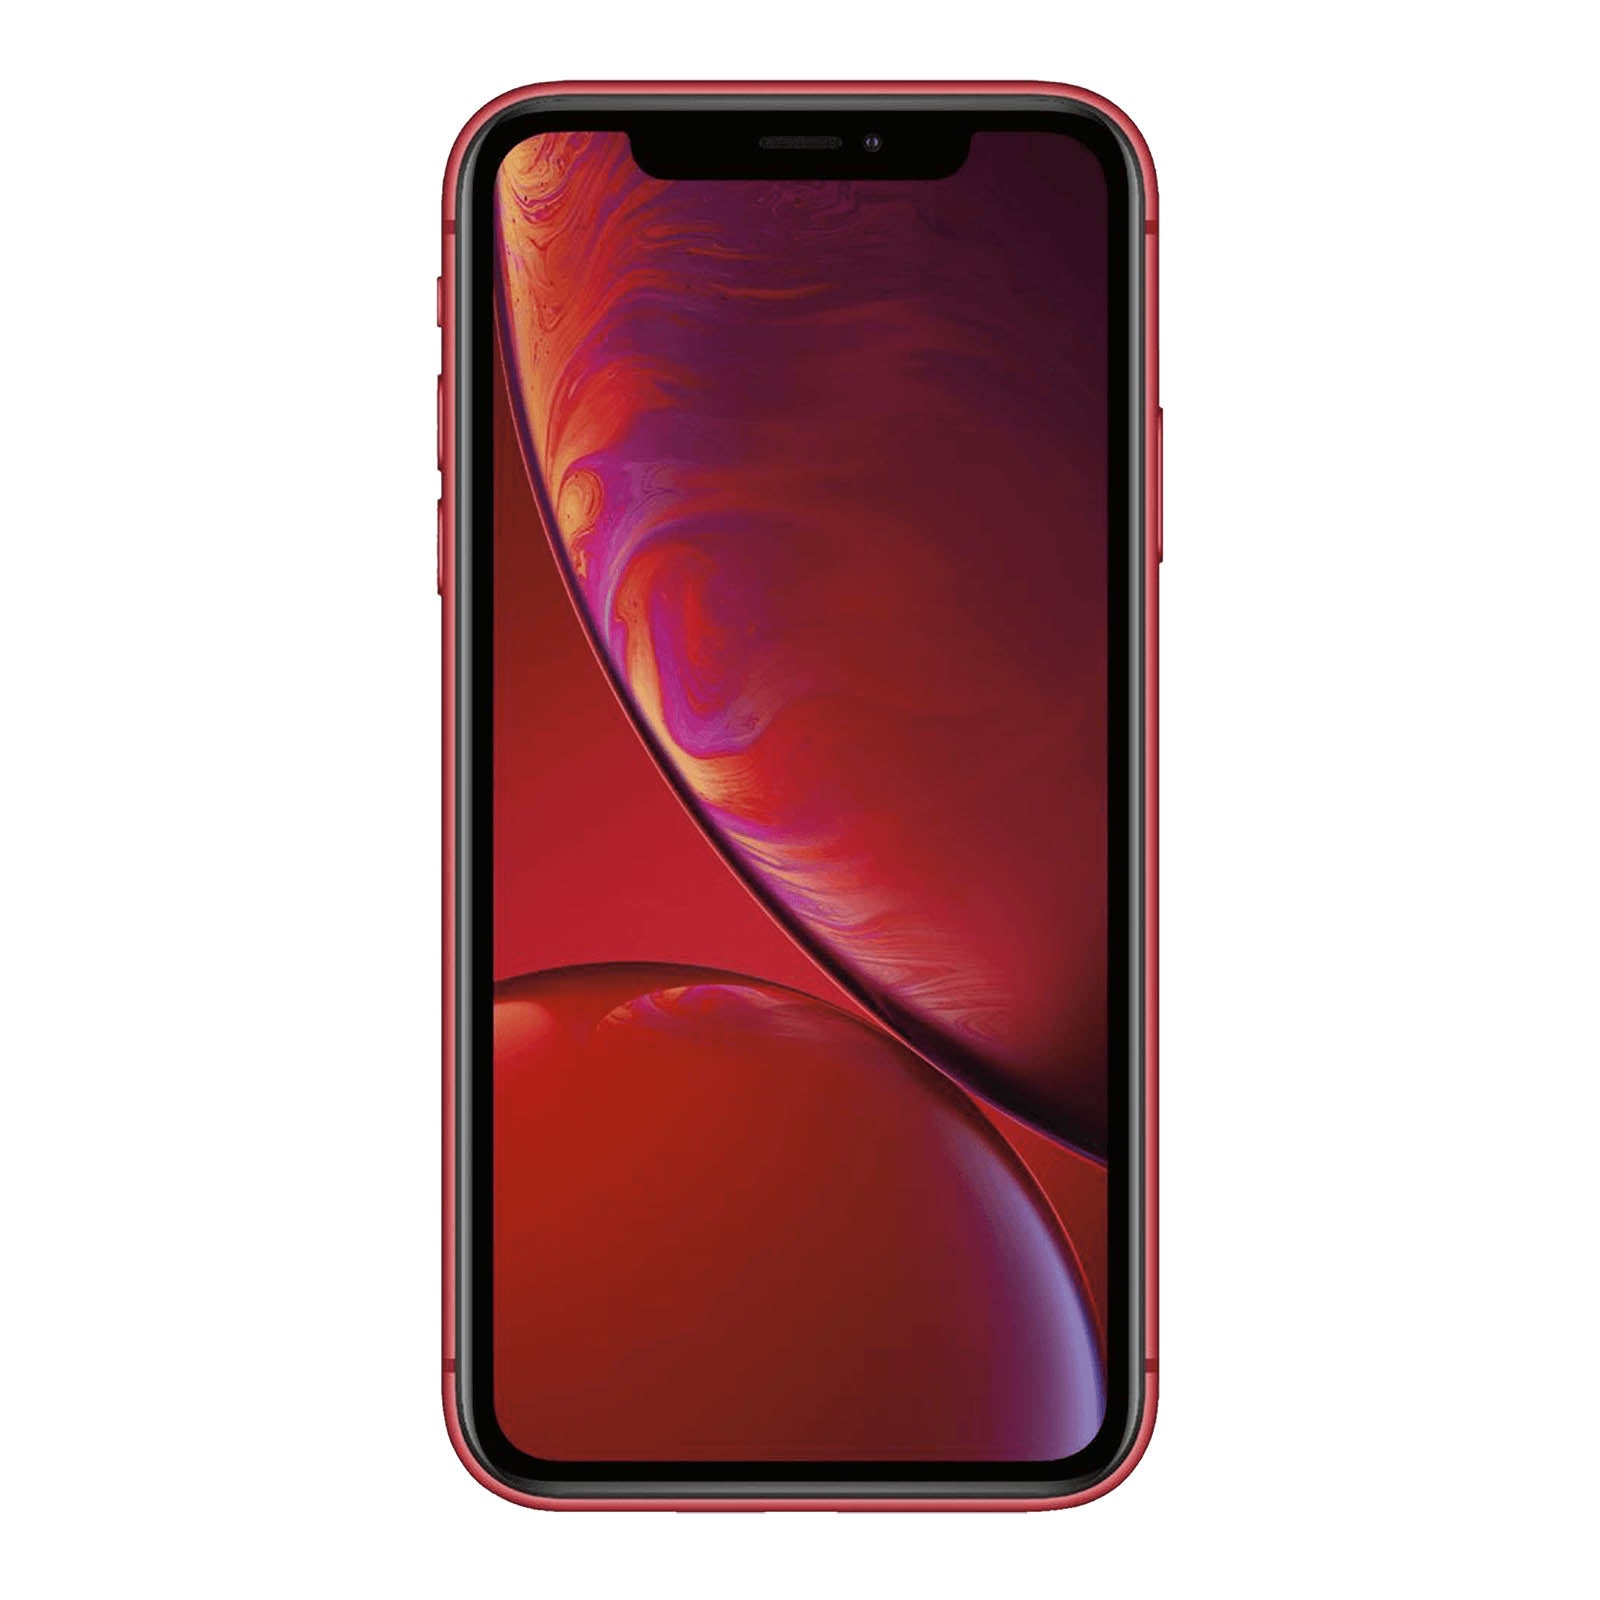 Apple iPhone XR 128GB Product Red Pristine - Sprint